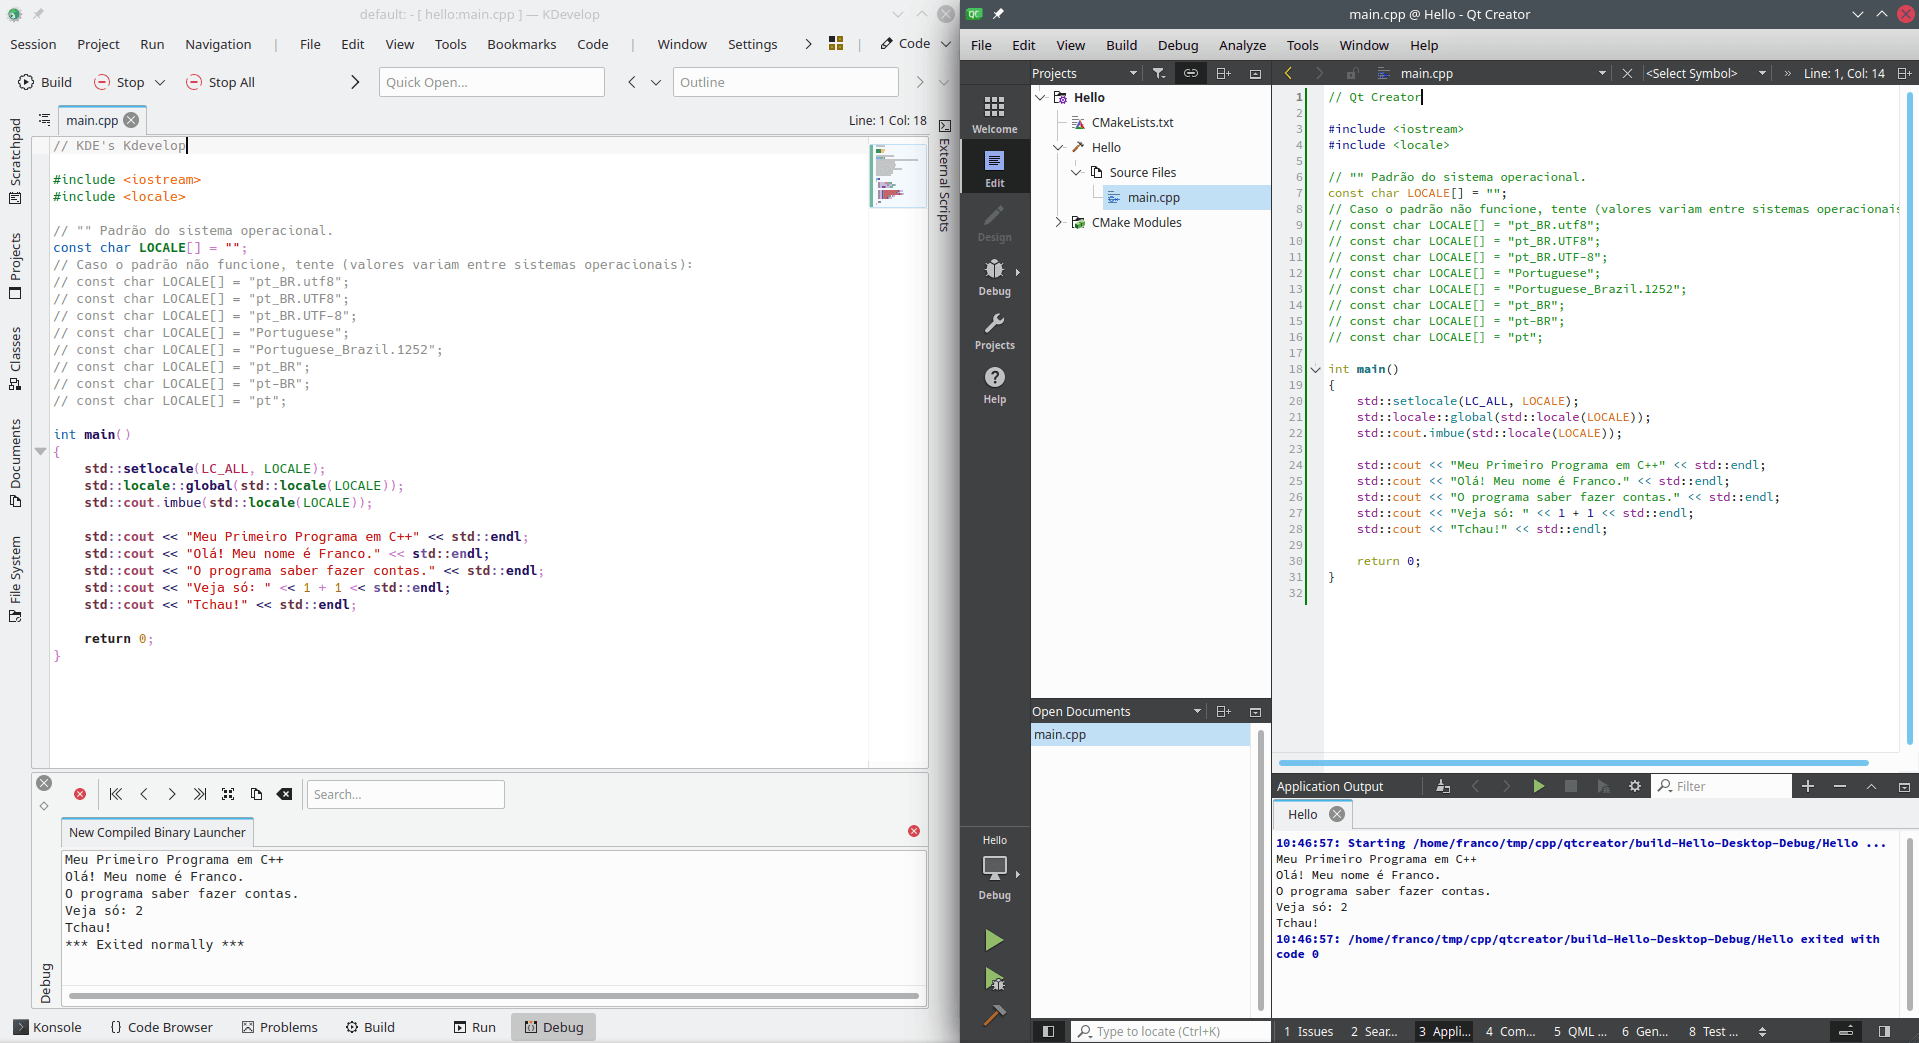 Examples of programming in C++. In the left part of the image, a program written in C++ being compiled and run by KDevelop. In the right part of the image, the same program after Qt Creator compiled and ran it.